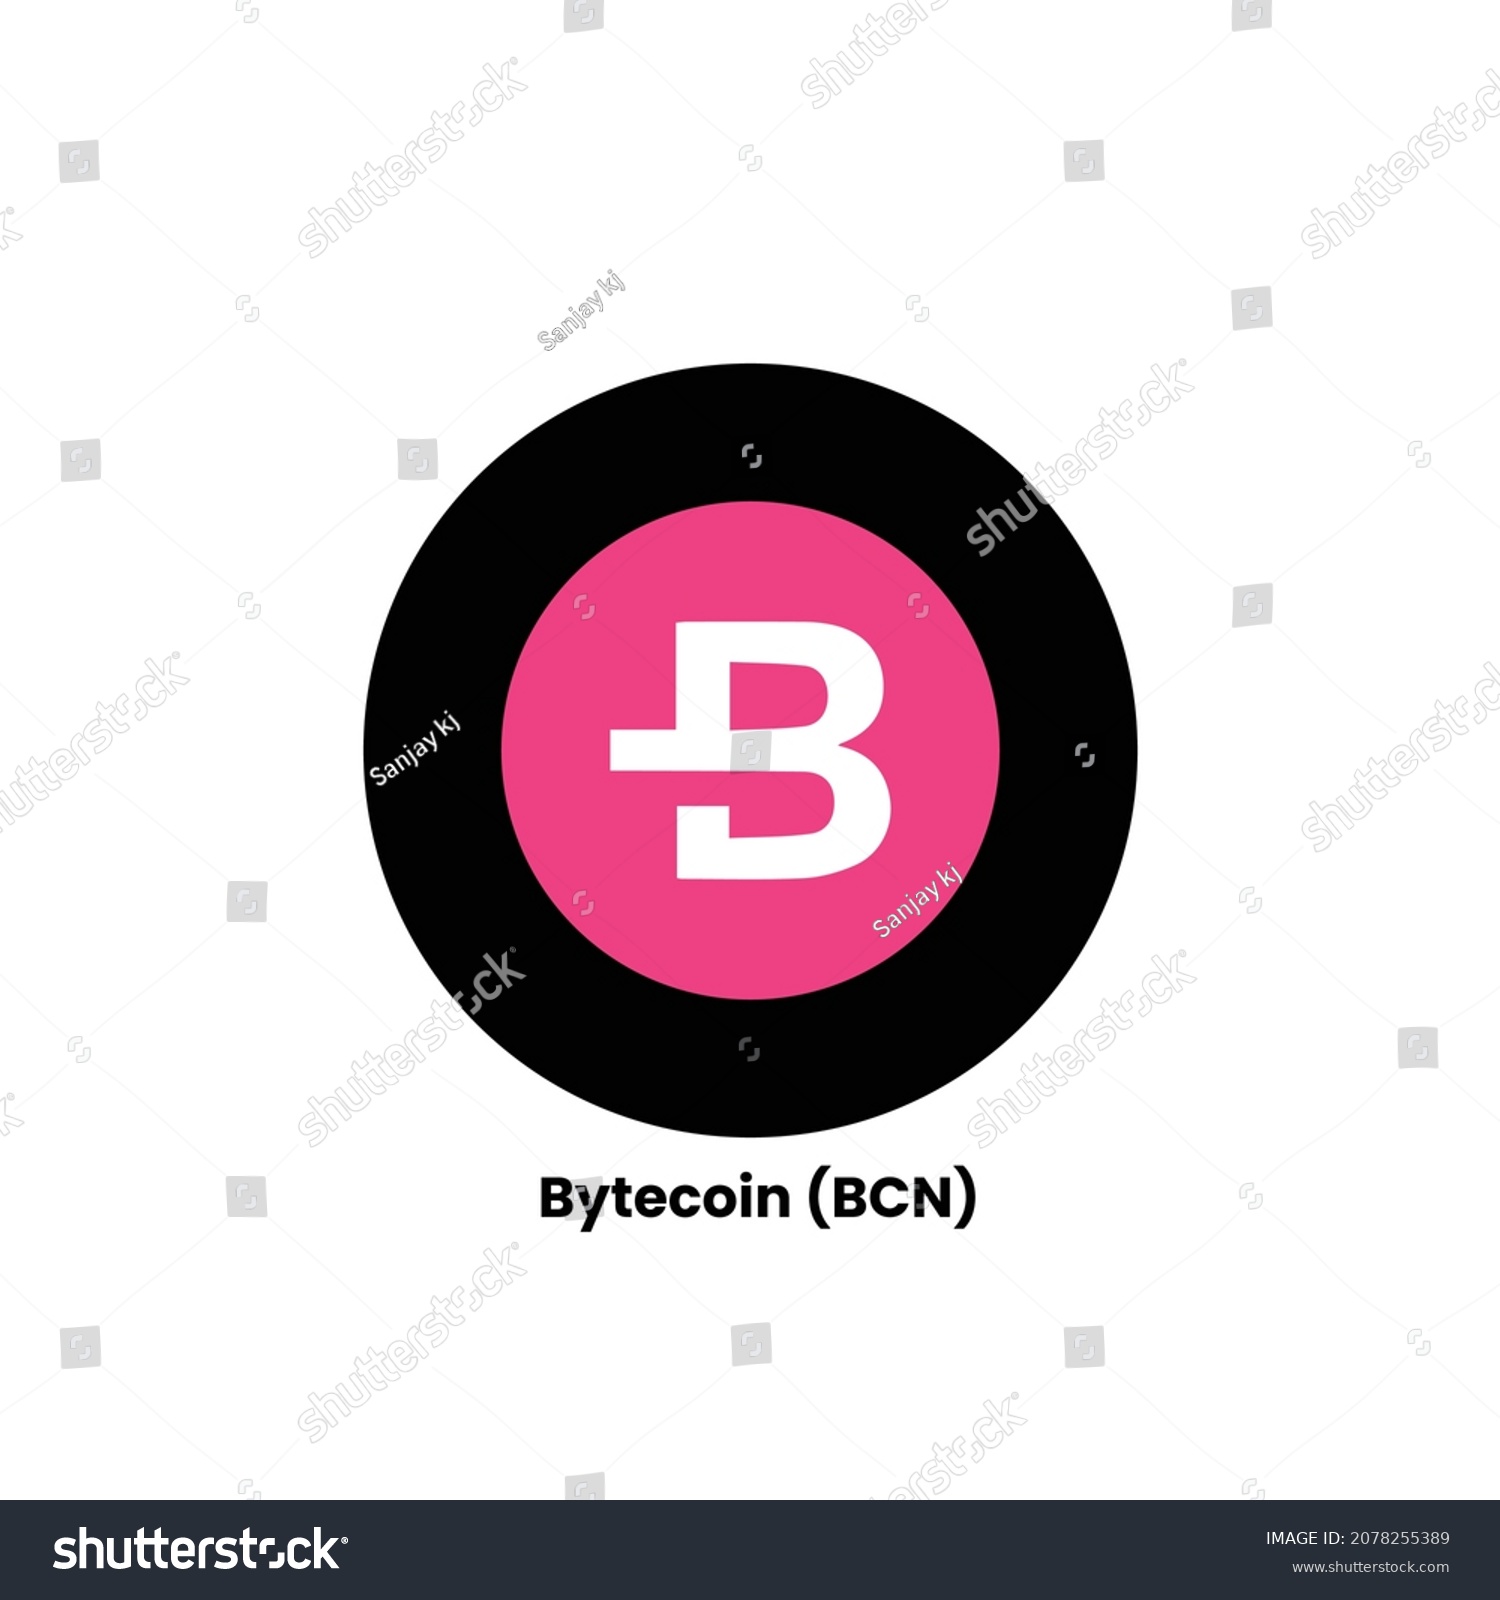 SVG of Vector illustration of Bytecoin (BCN) cryptocurrency logo, symbol in a white background. svg